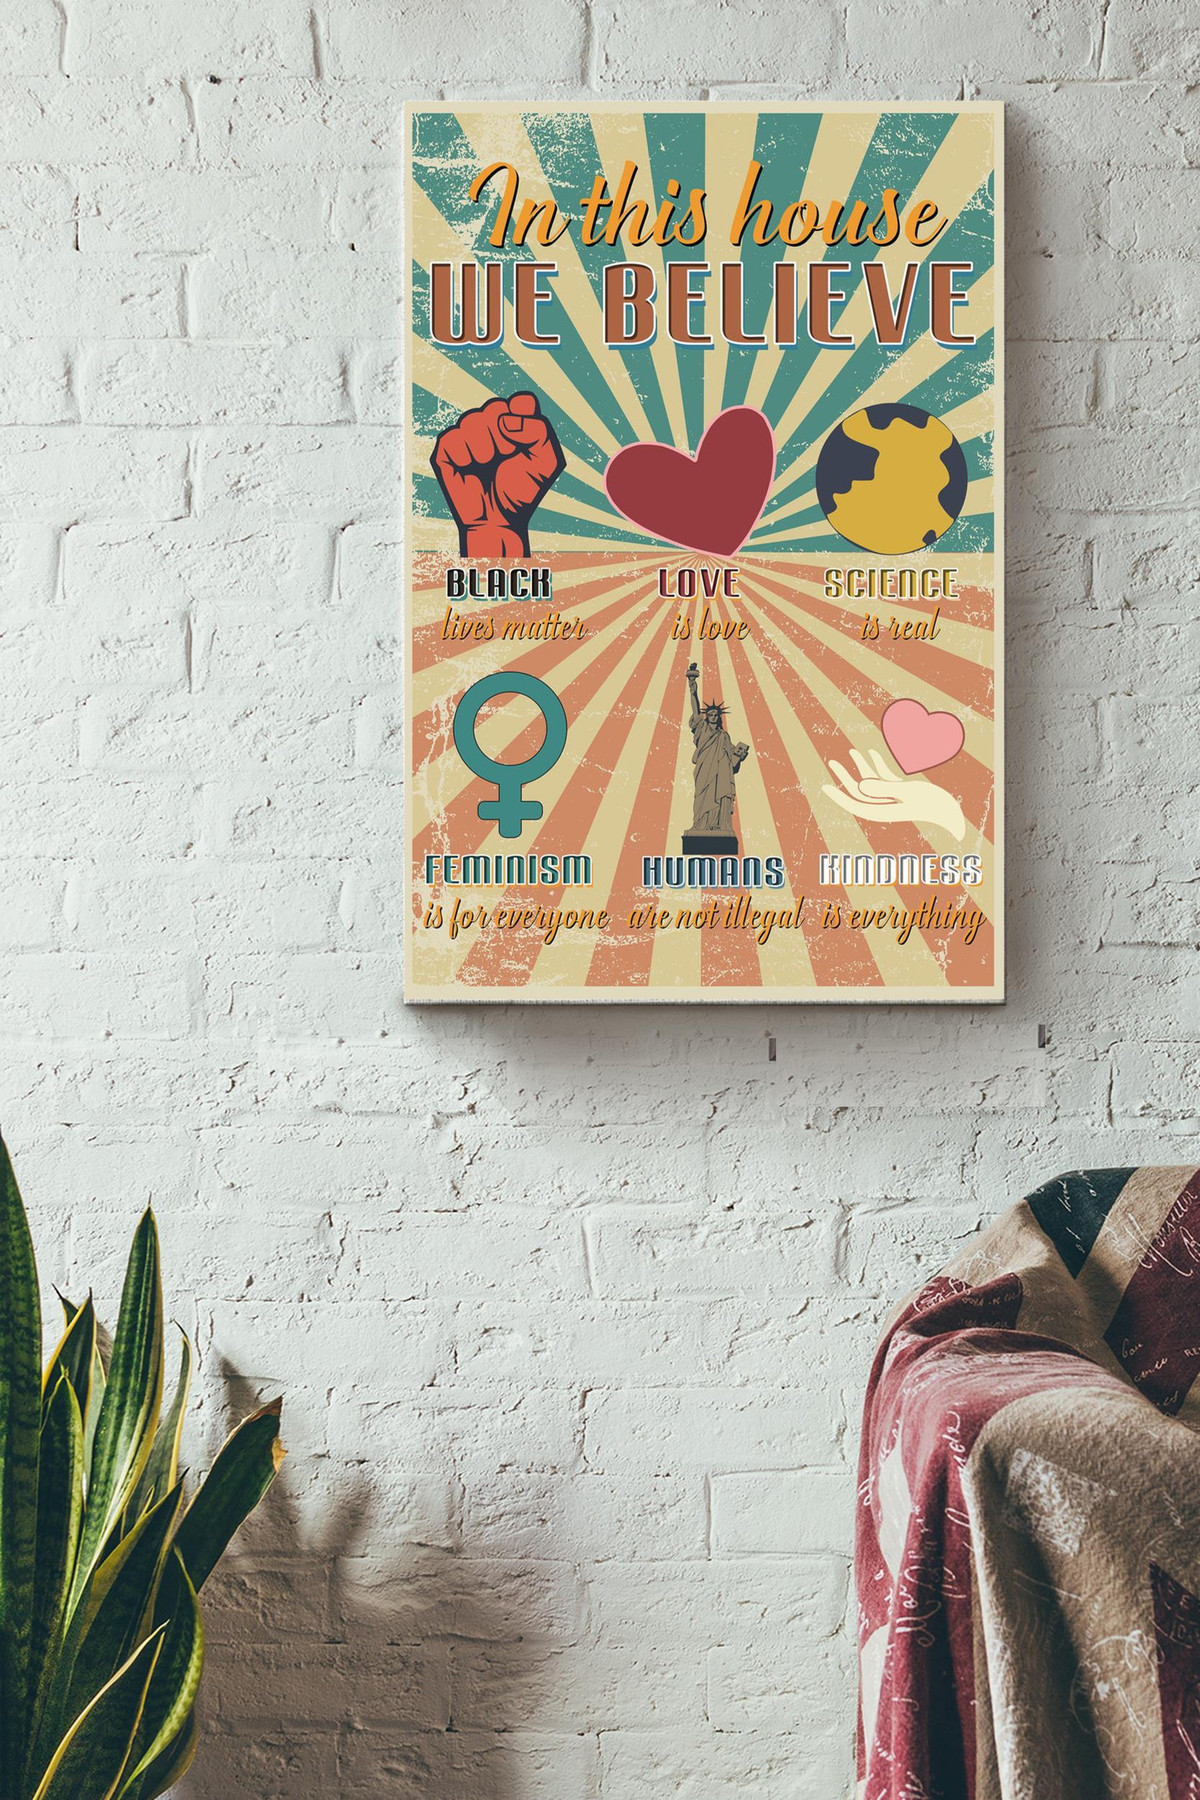 In This House We Believe In Positive Things Vintage Canvas Decor Gift For Black Lives Matter Love Is Love Science Is Real Feminism For Everyone Humanity Kindnes Canvas Gallery Painting Wrapped Canvas  Wrapped Canvas 8x10